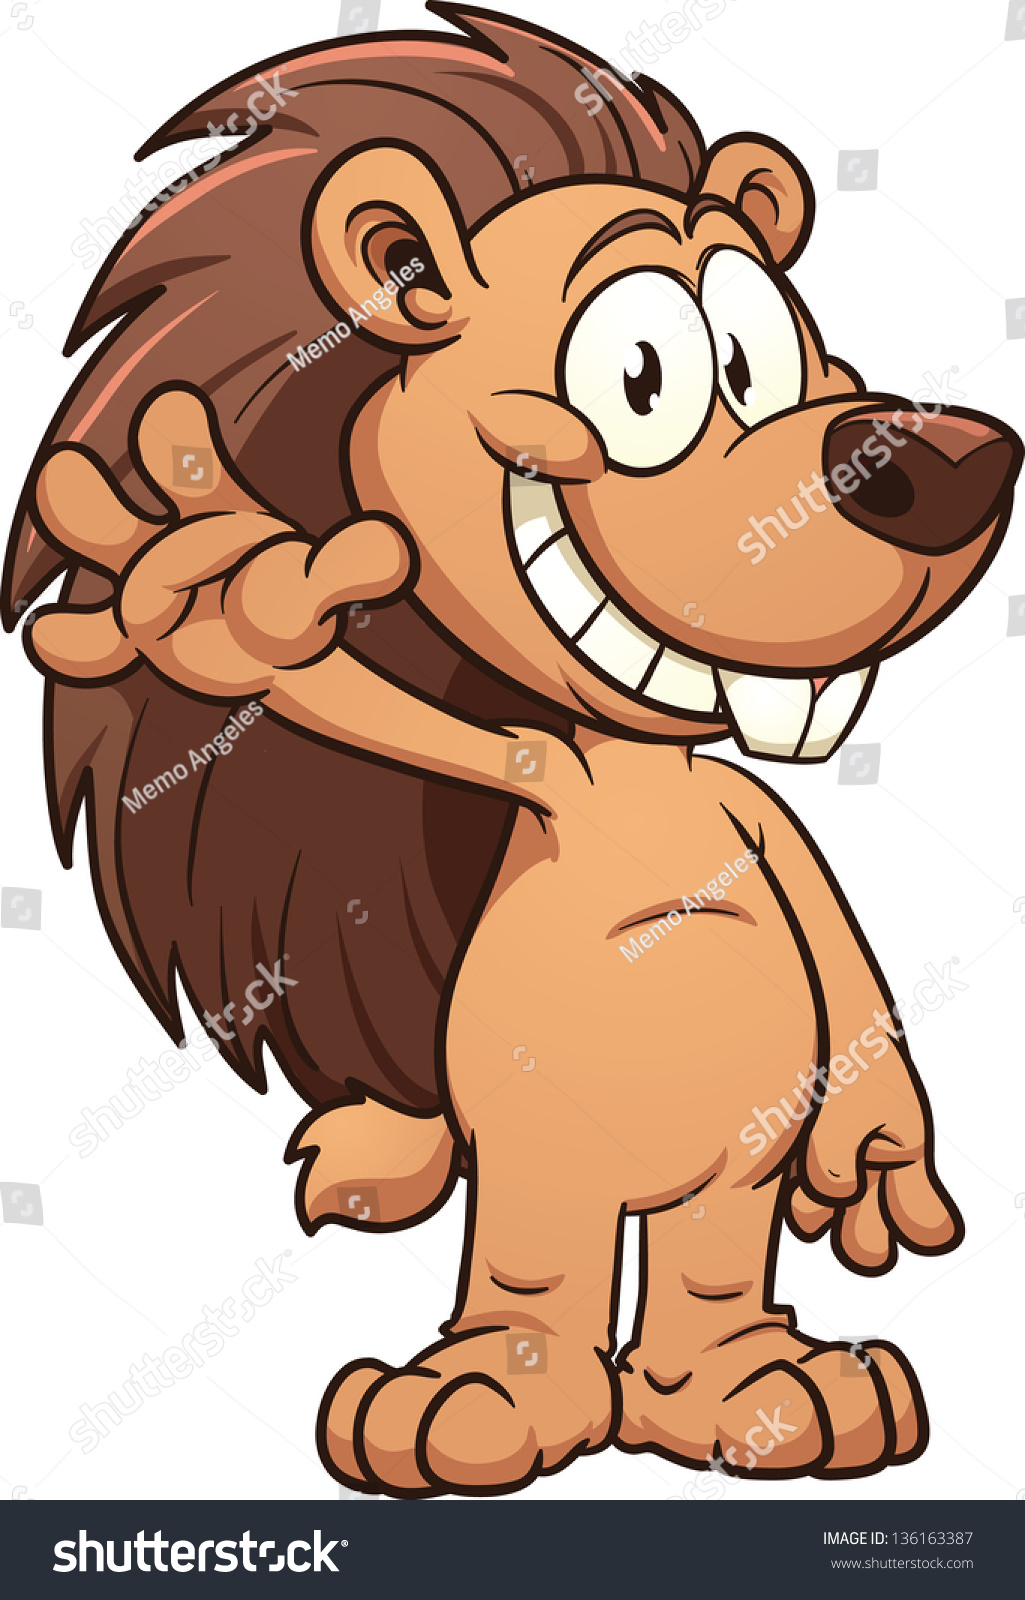 Cute Cartoon Porcupine Vector Clip Art Illustration With Simple Gradients All In A Single 